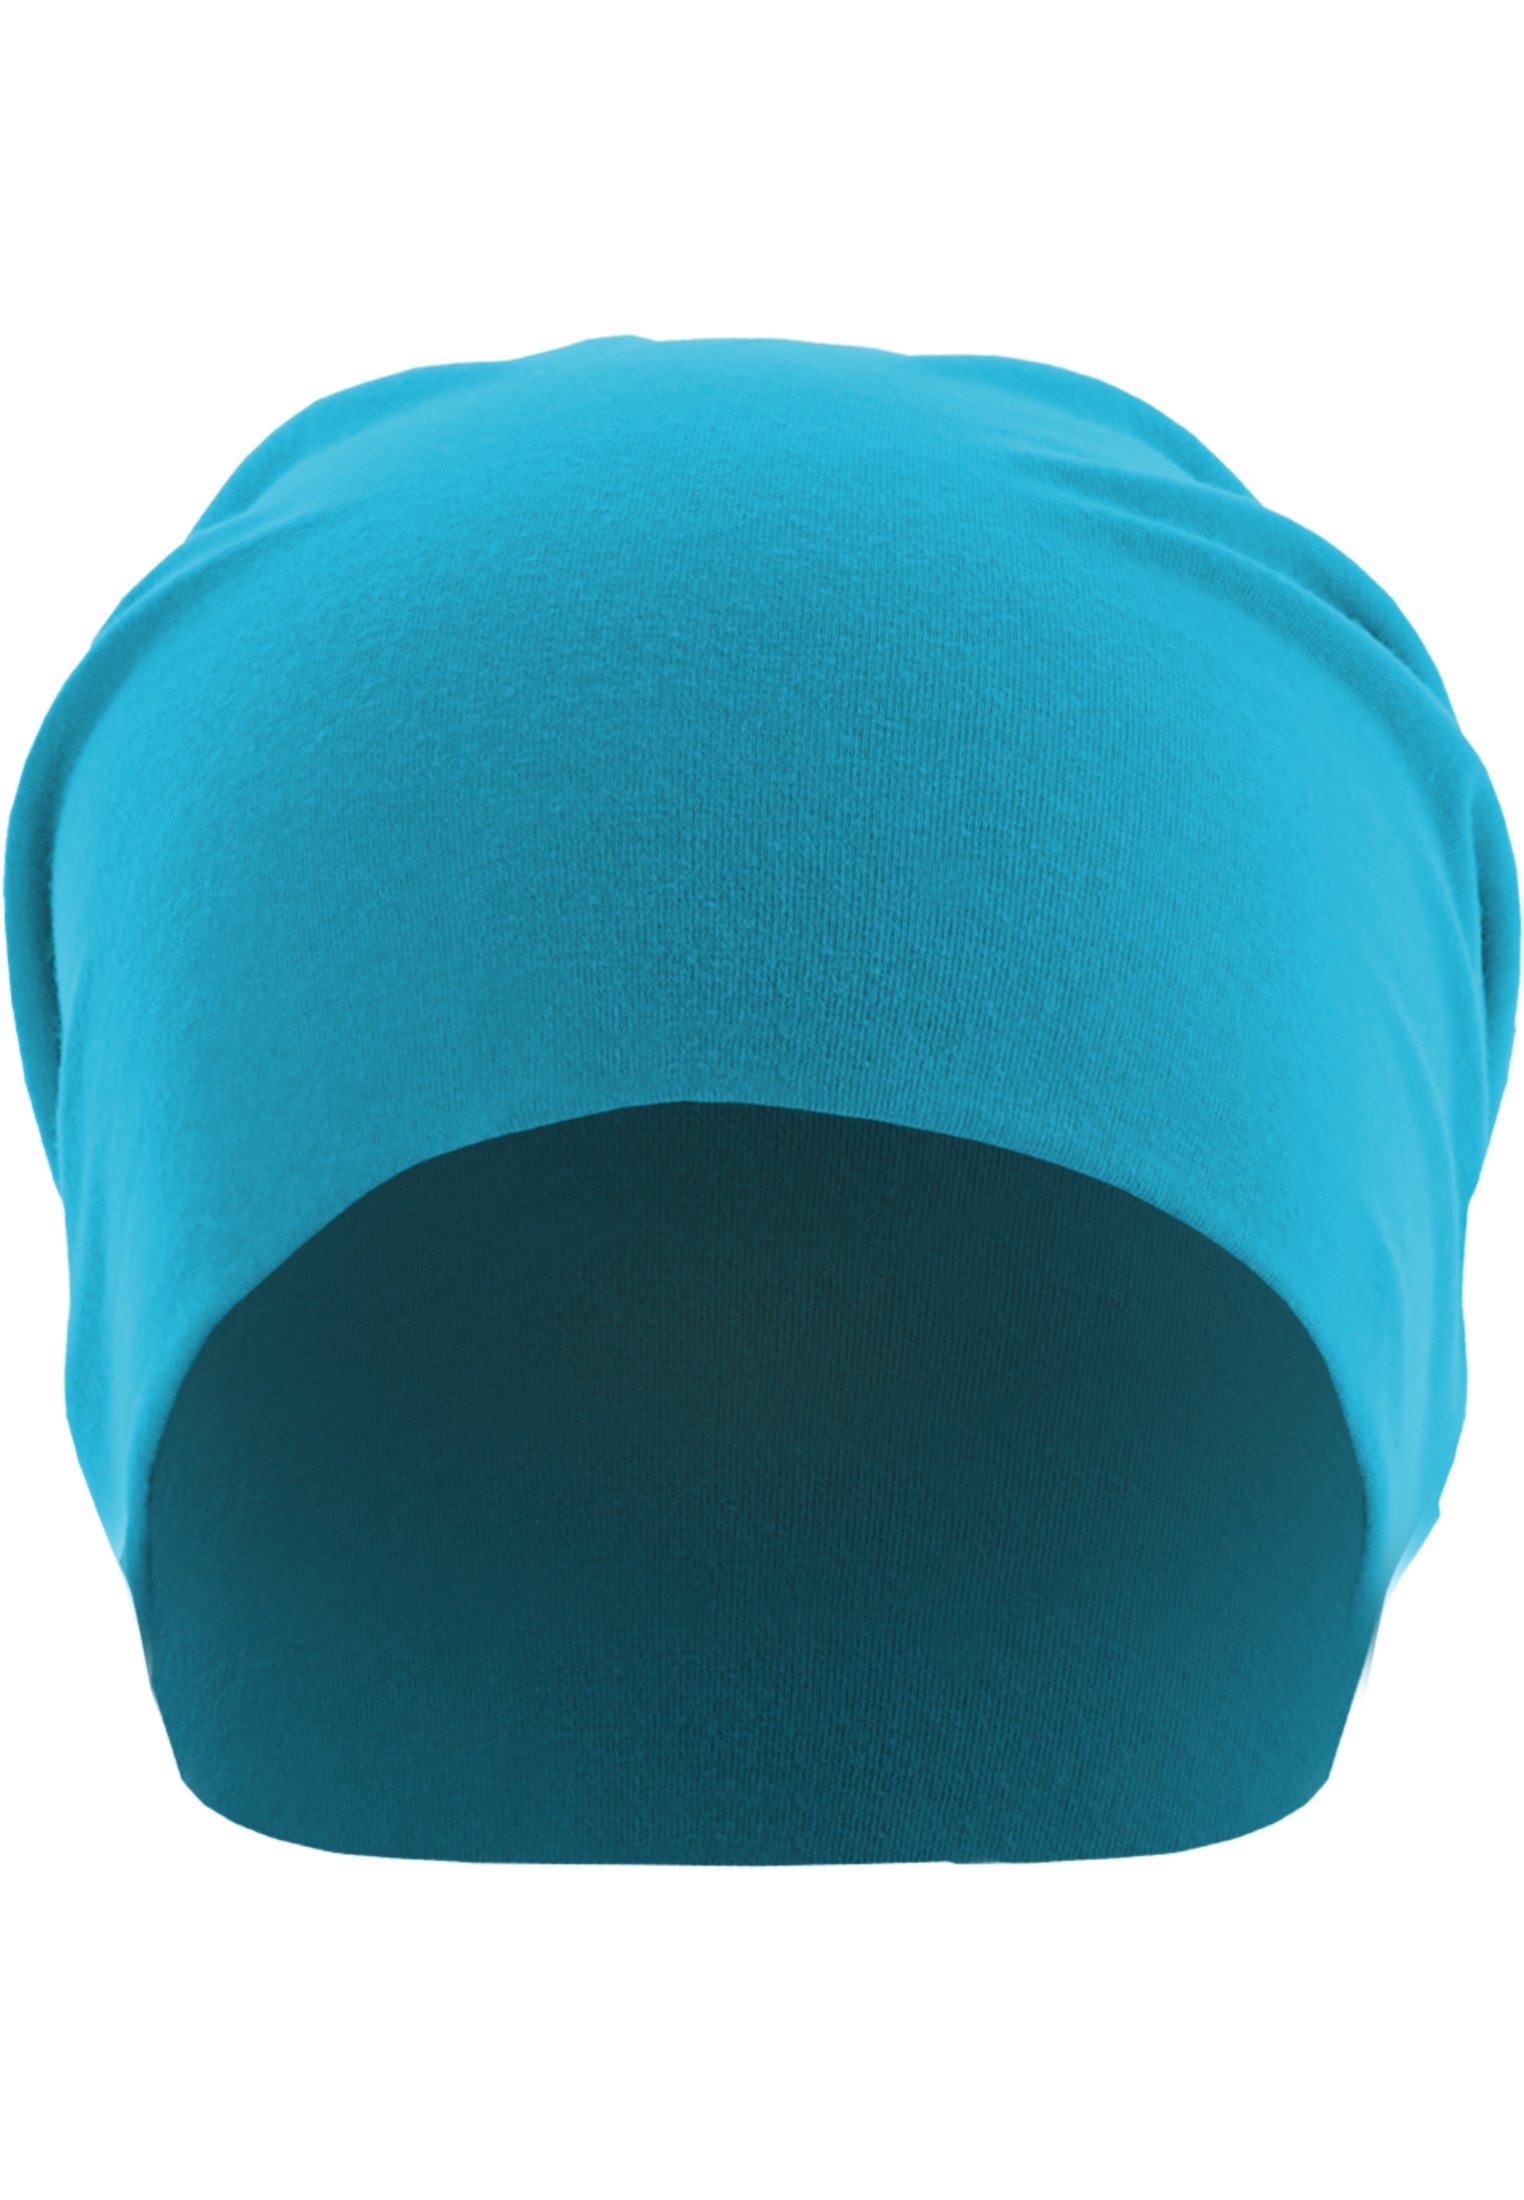 Jersey Beanie MSTRDS turquoise one size